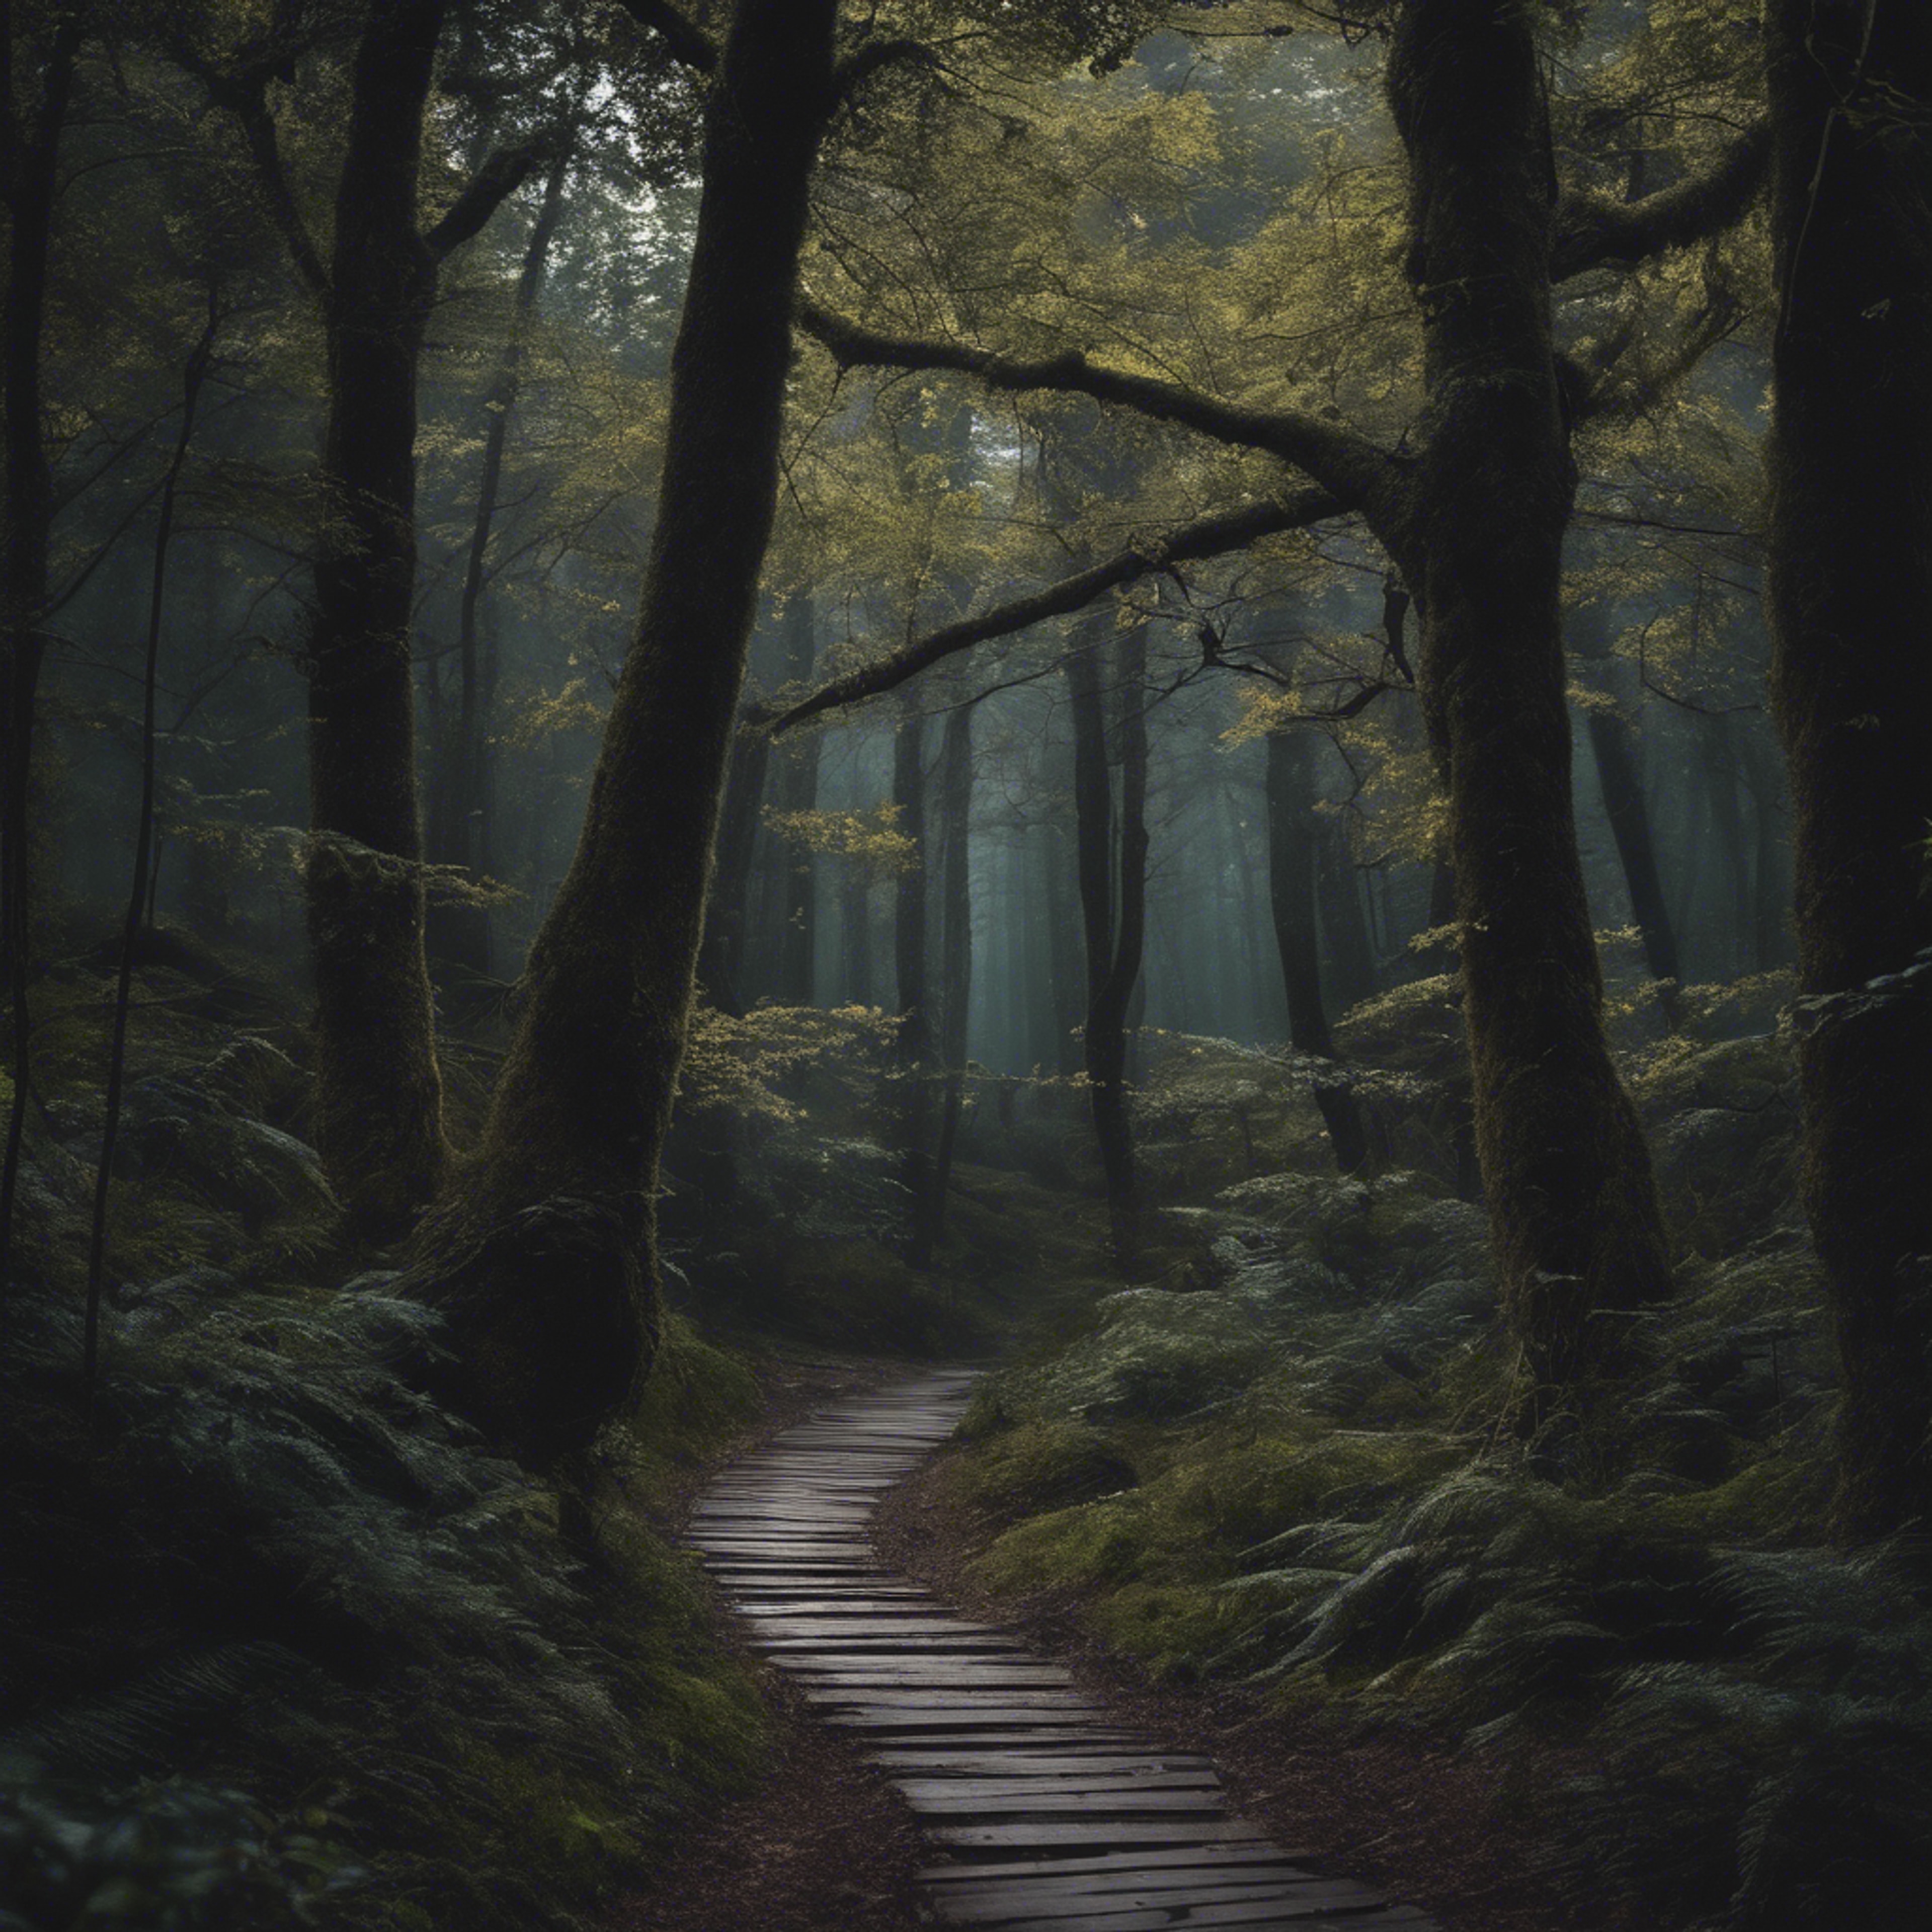 An untraveled path in a dark and mysterious forest Wallpaper[df6a1d860b87482e8c75]